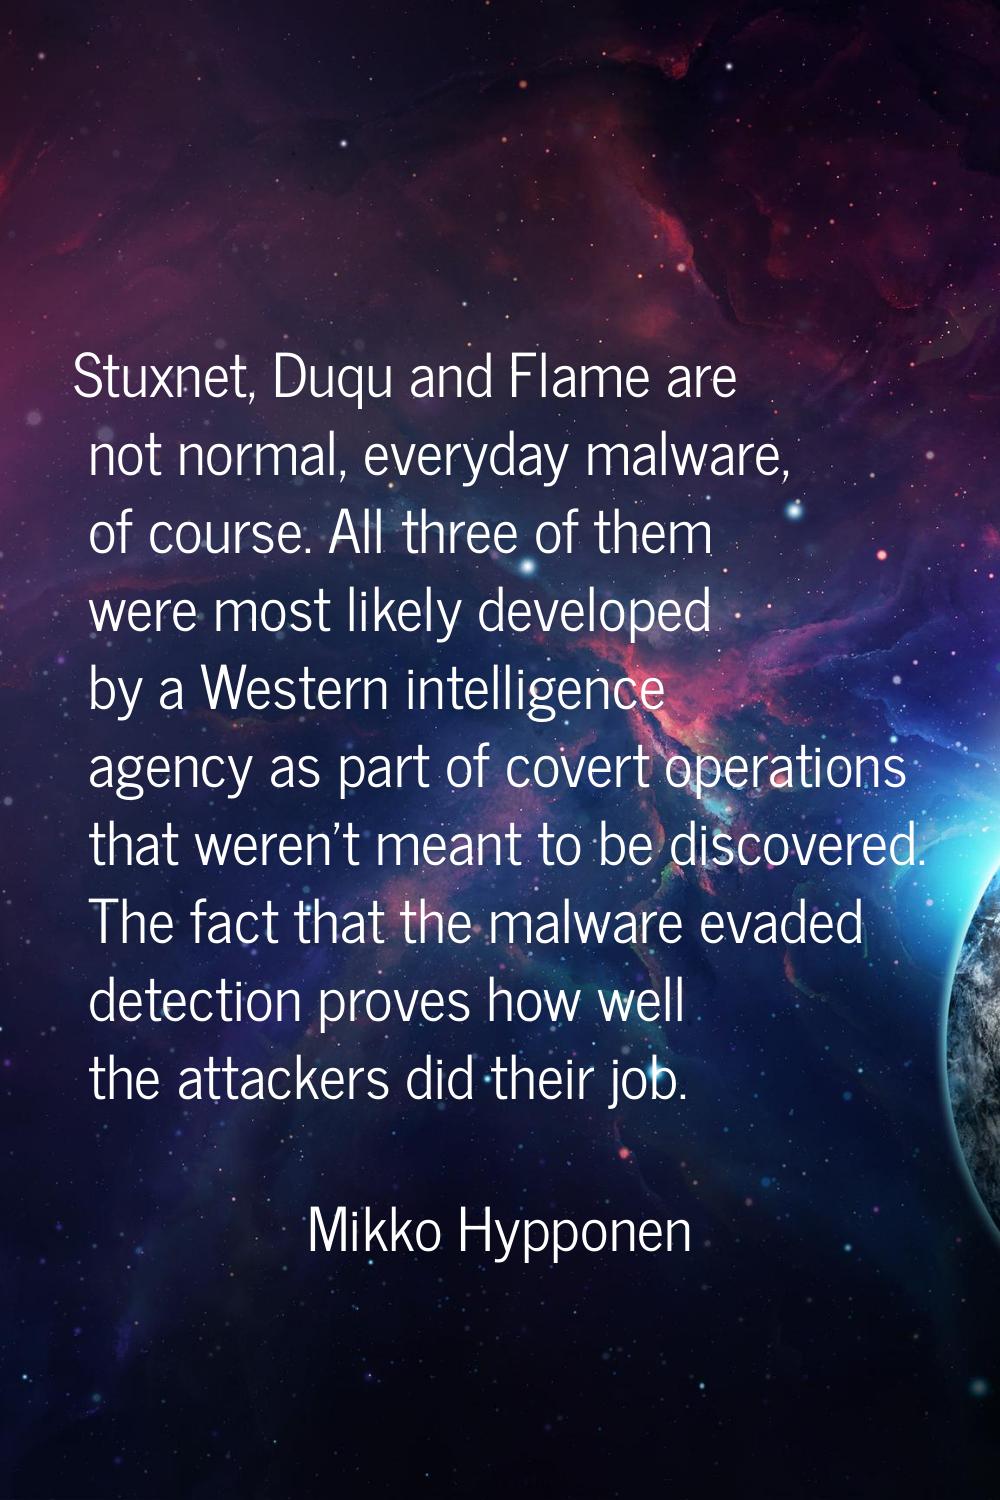 Stuxnet, Duqu and Flame are not normal, everyday malware, of course. All three of them were most li